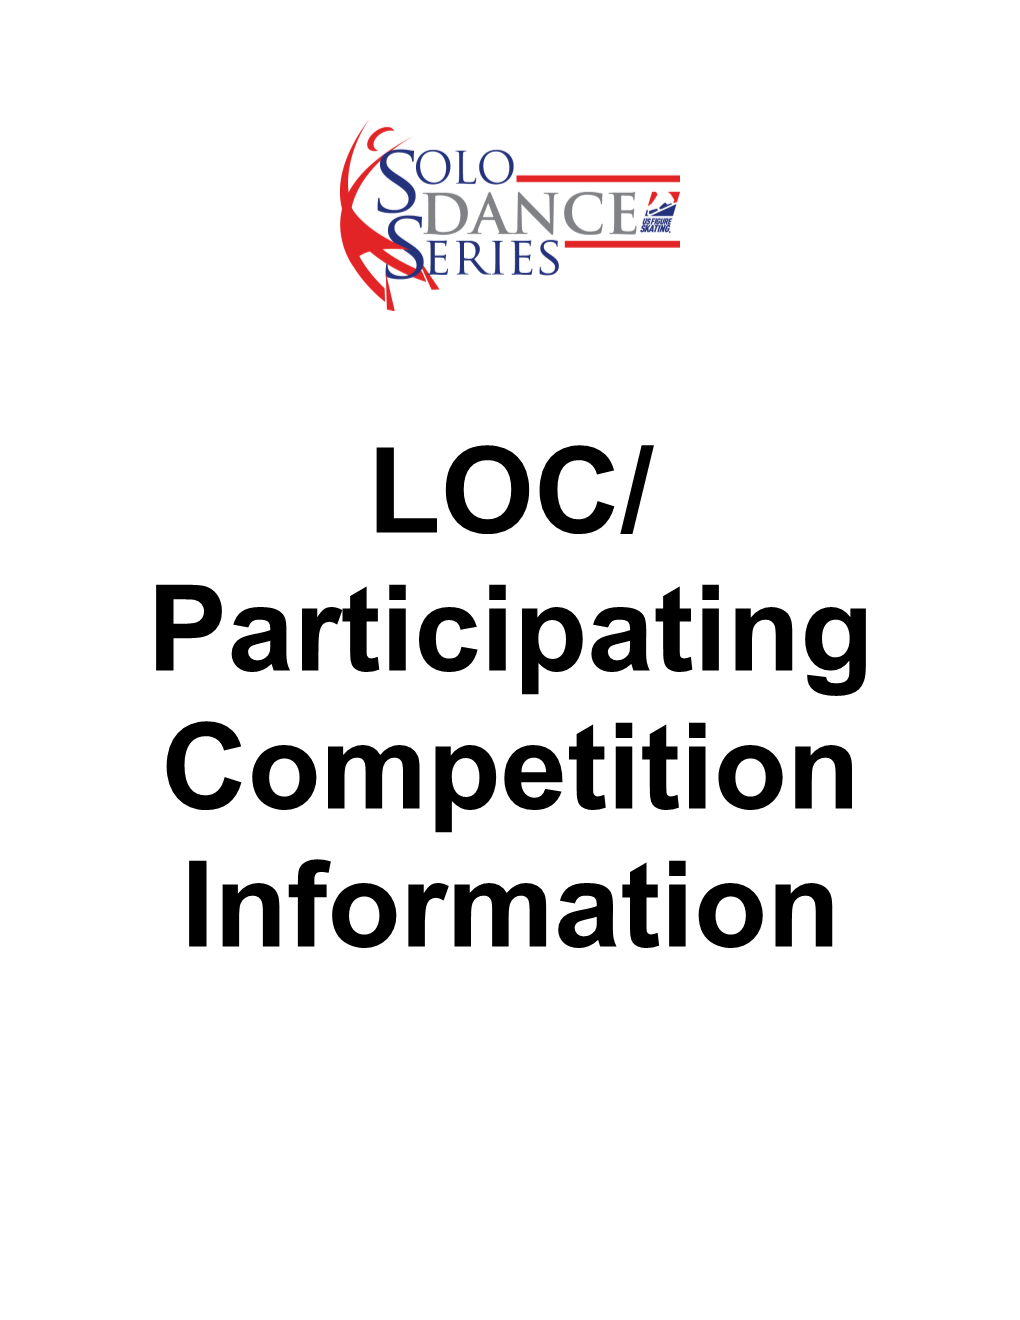 Participating Competition Information